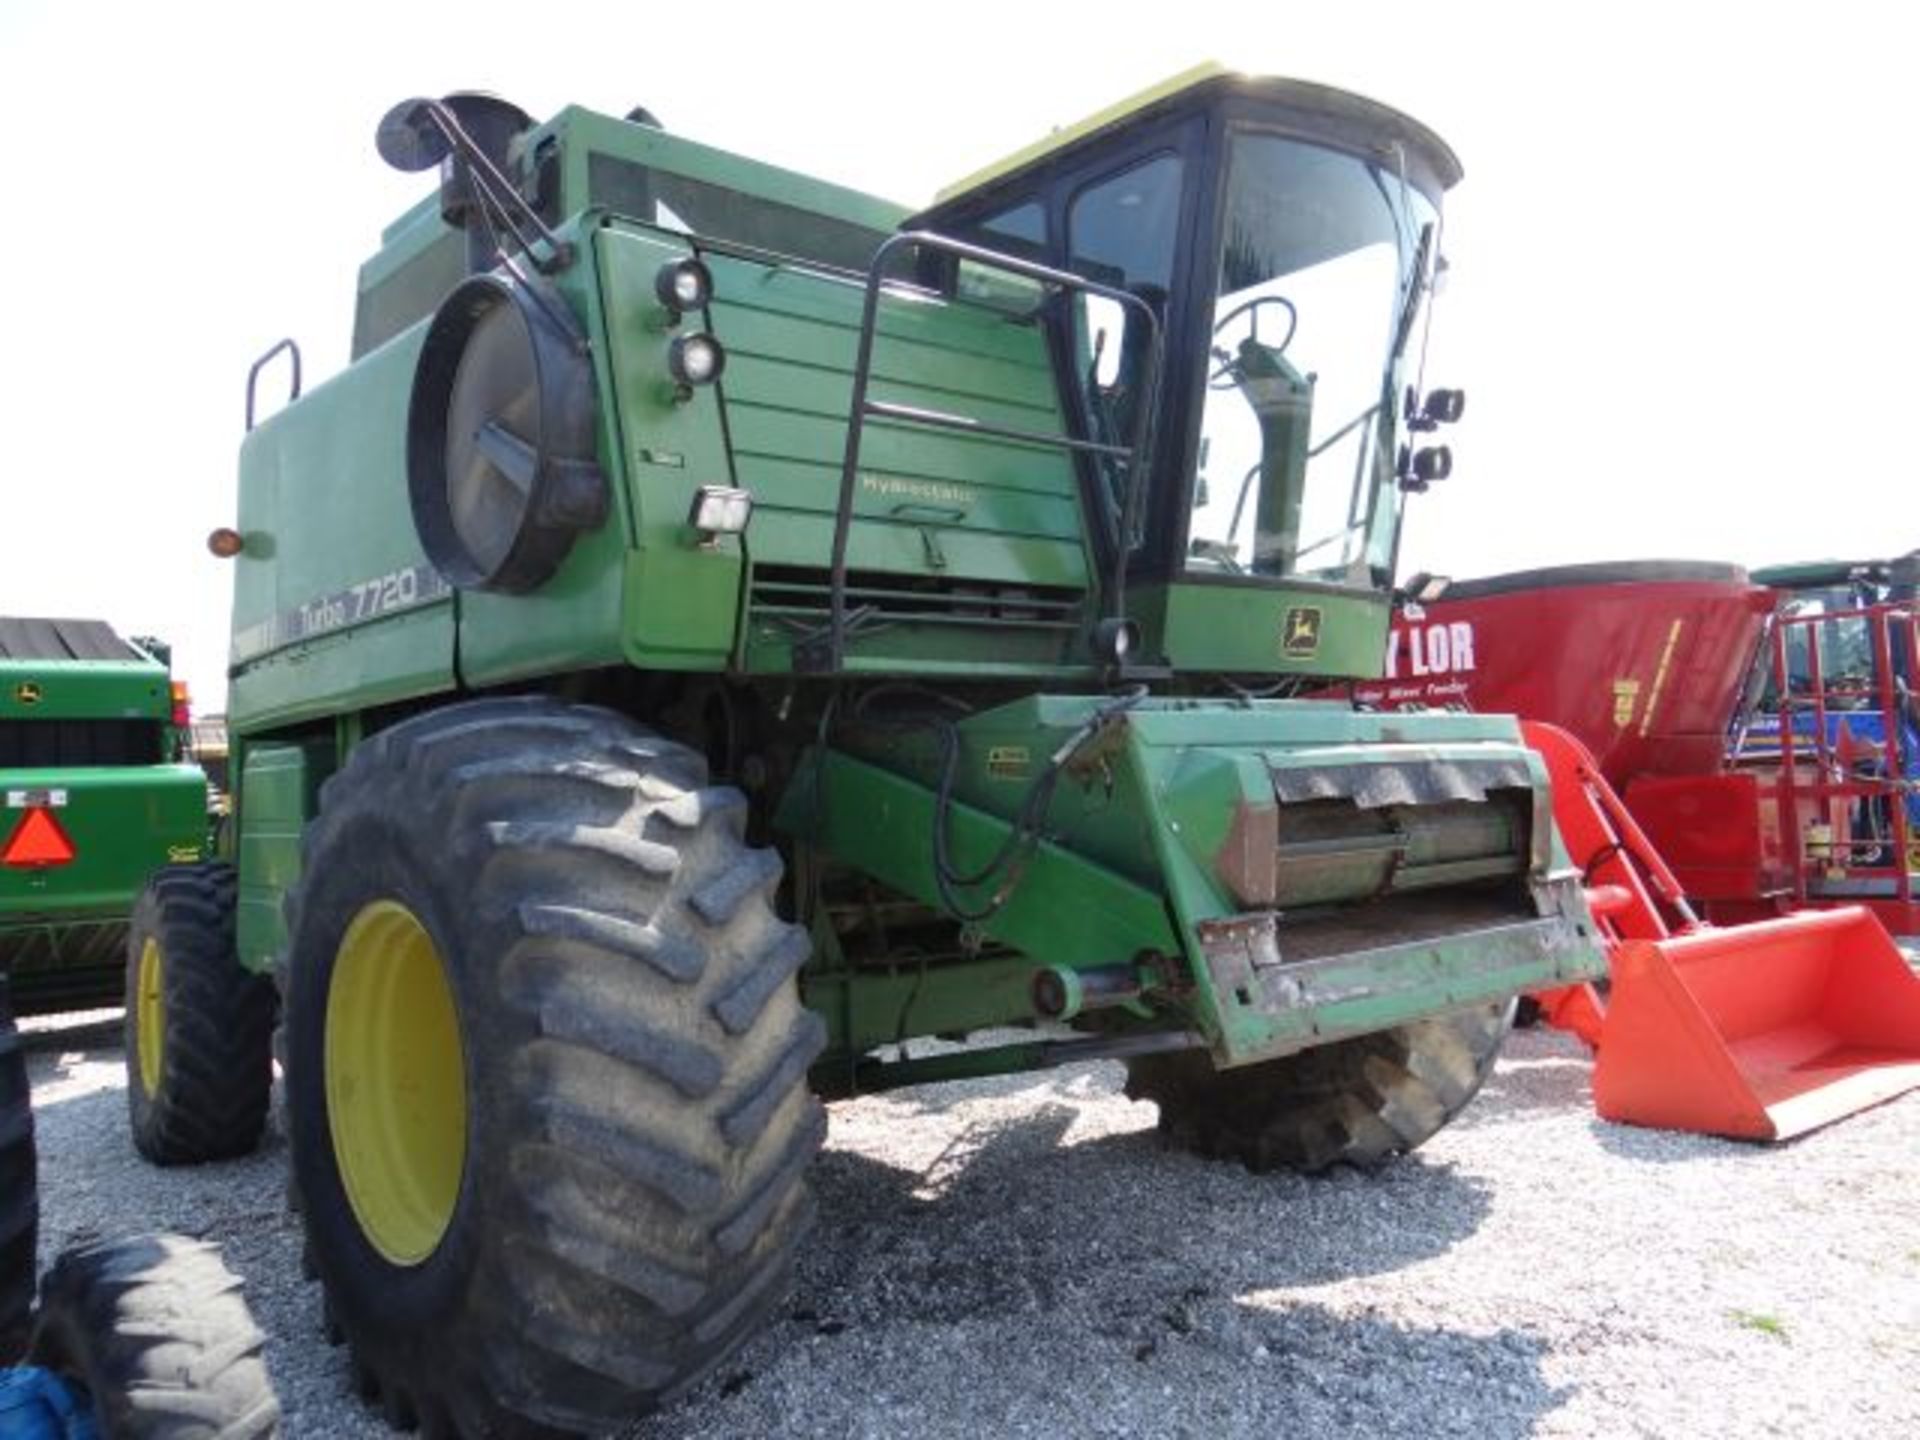 JD 7720 Combine, 1979 Combine has been maintaind, Details Listed on Sheet, Manaul in the Shed